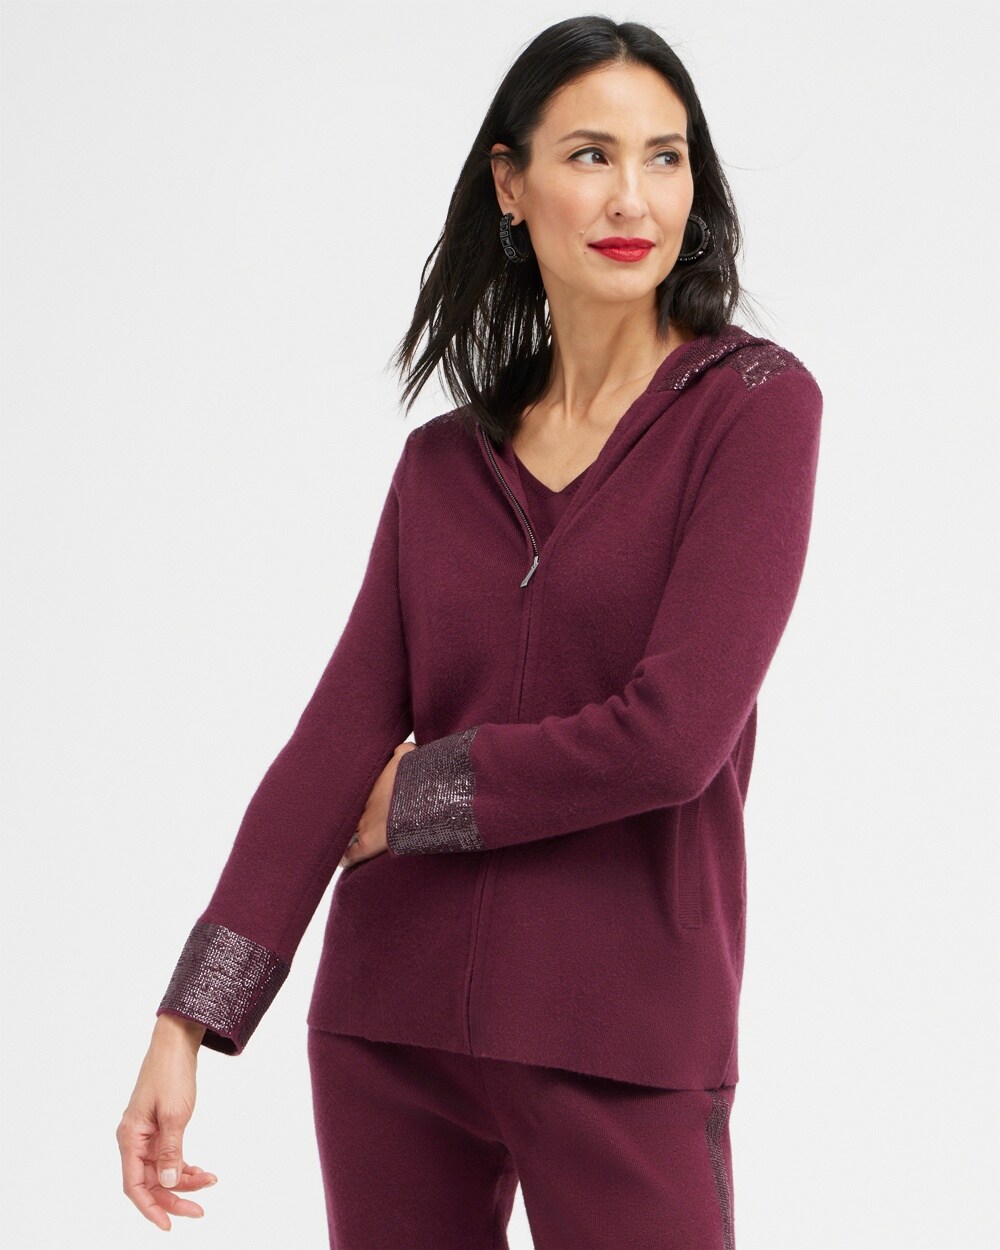 Zenergy Luxe Cashmere Blend Sequin Sweater